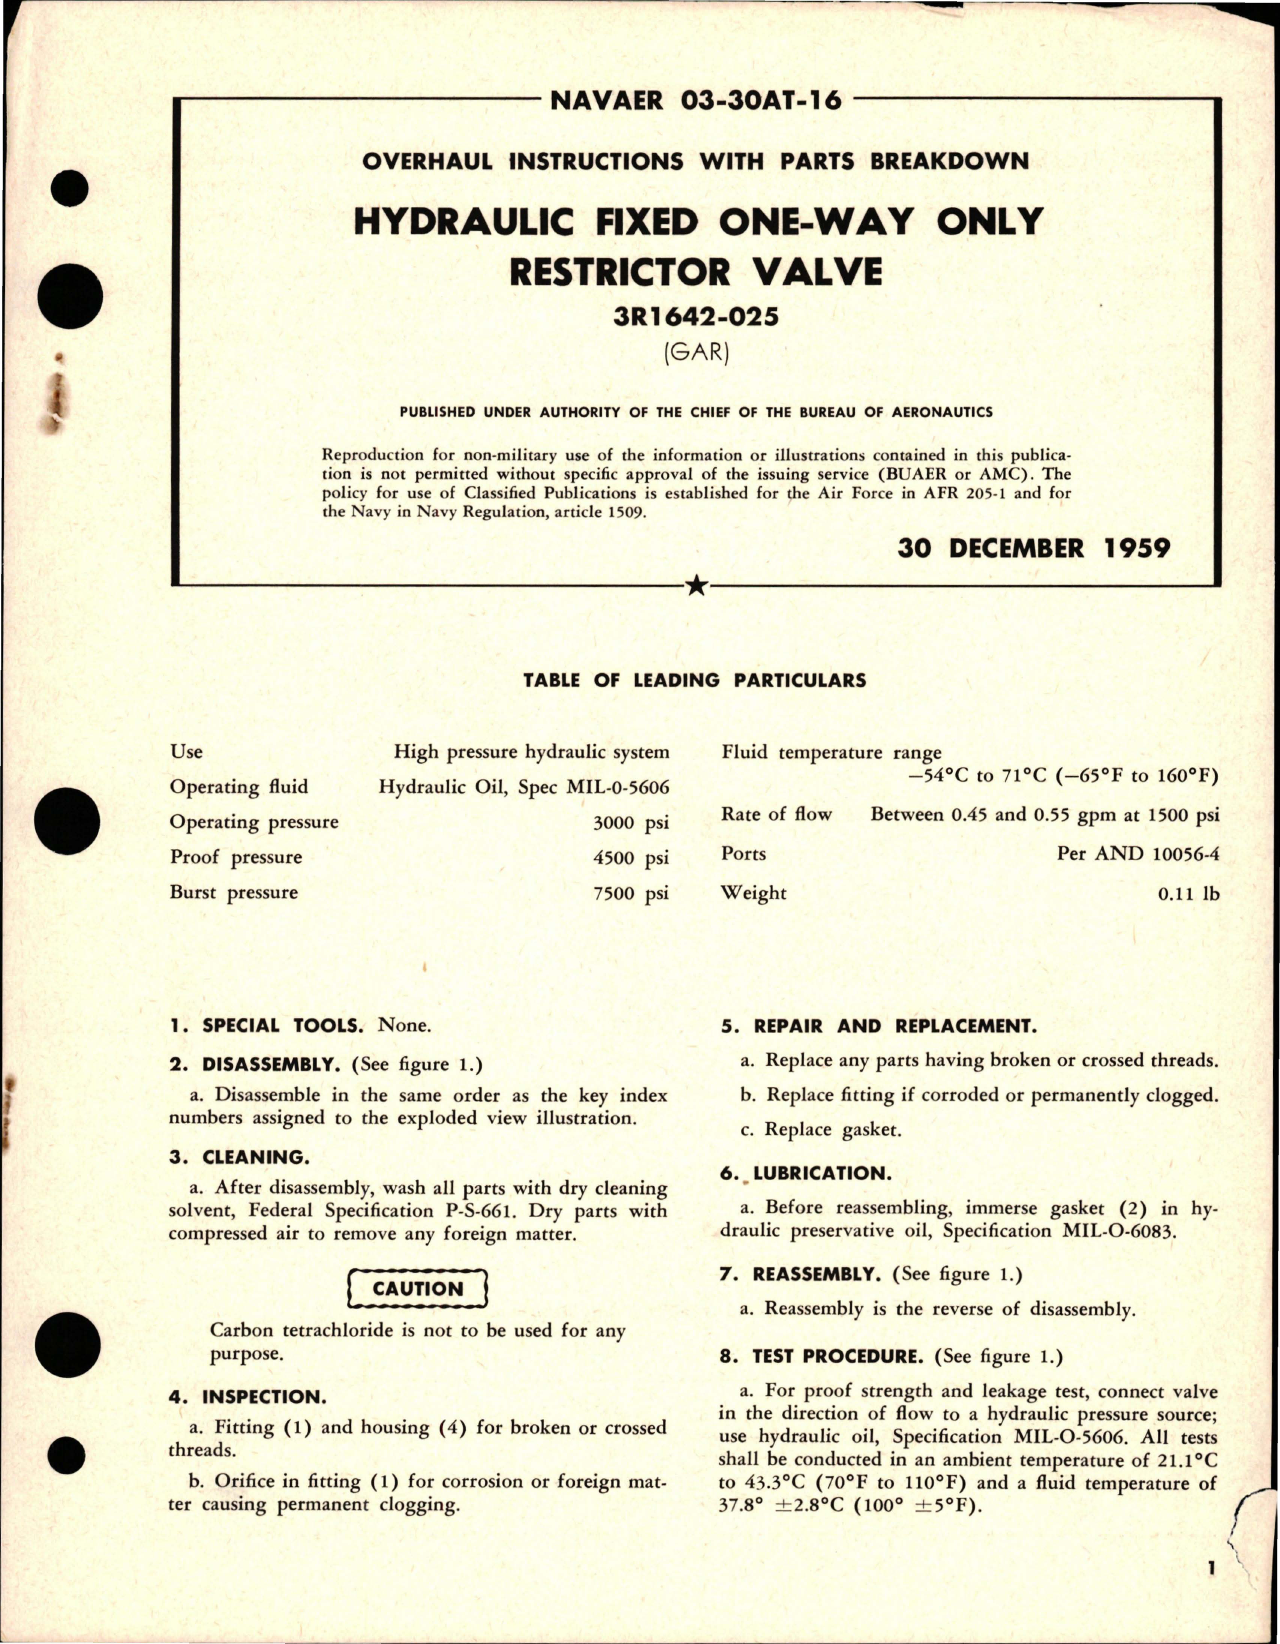 Sample page 1 from AirCorps Library document: Overhaul Instructions with Parts Breakdown for Hydraulic Fixed One-Way Only Restrictor Valve - 3R1642-025 